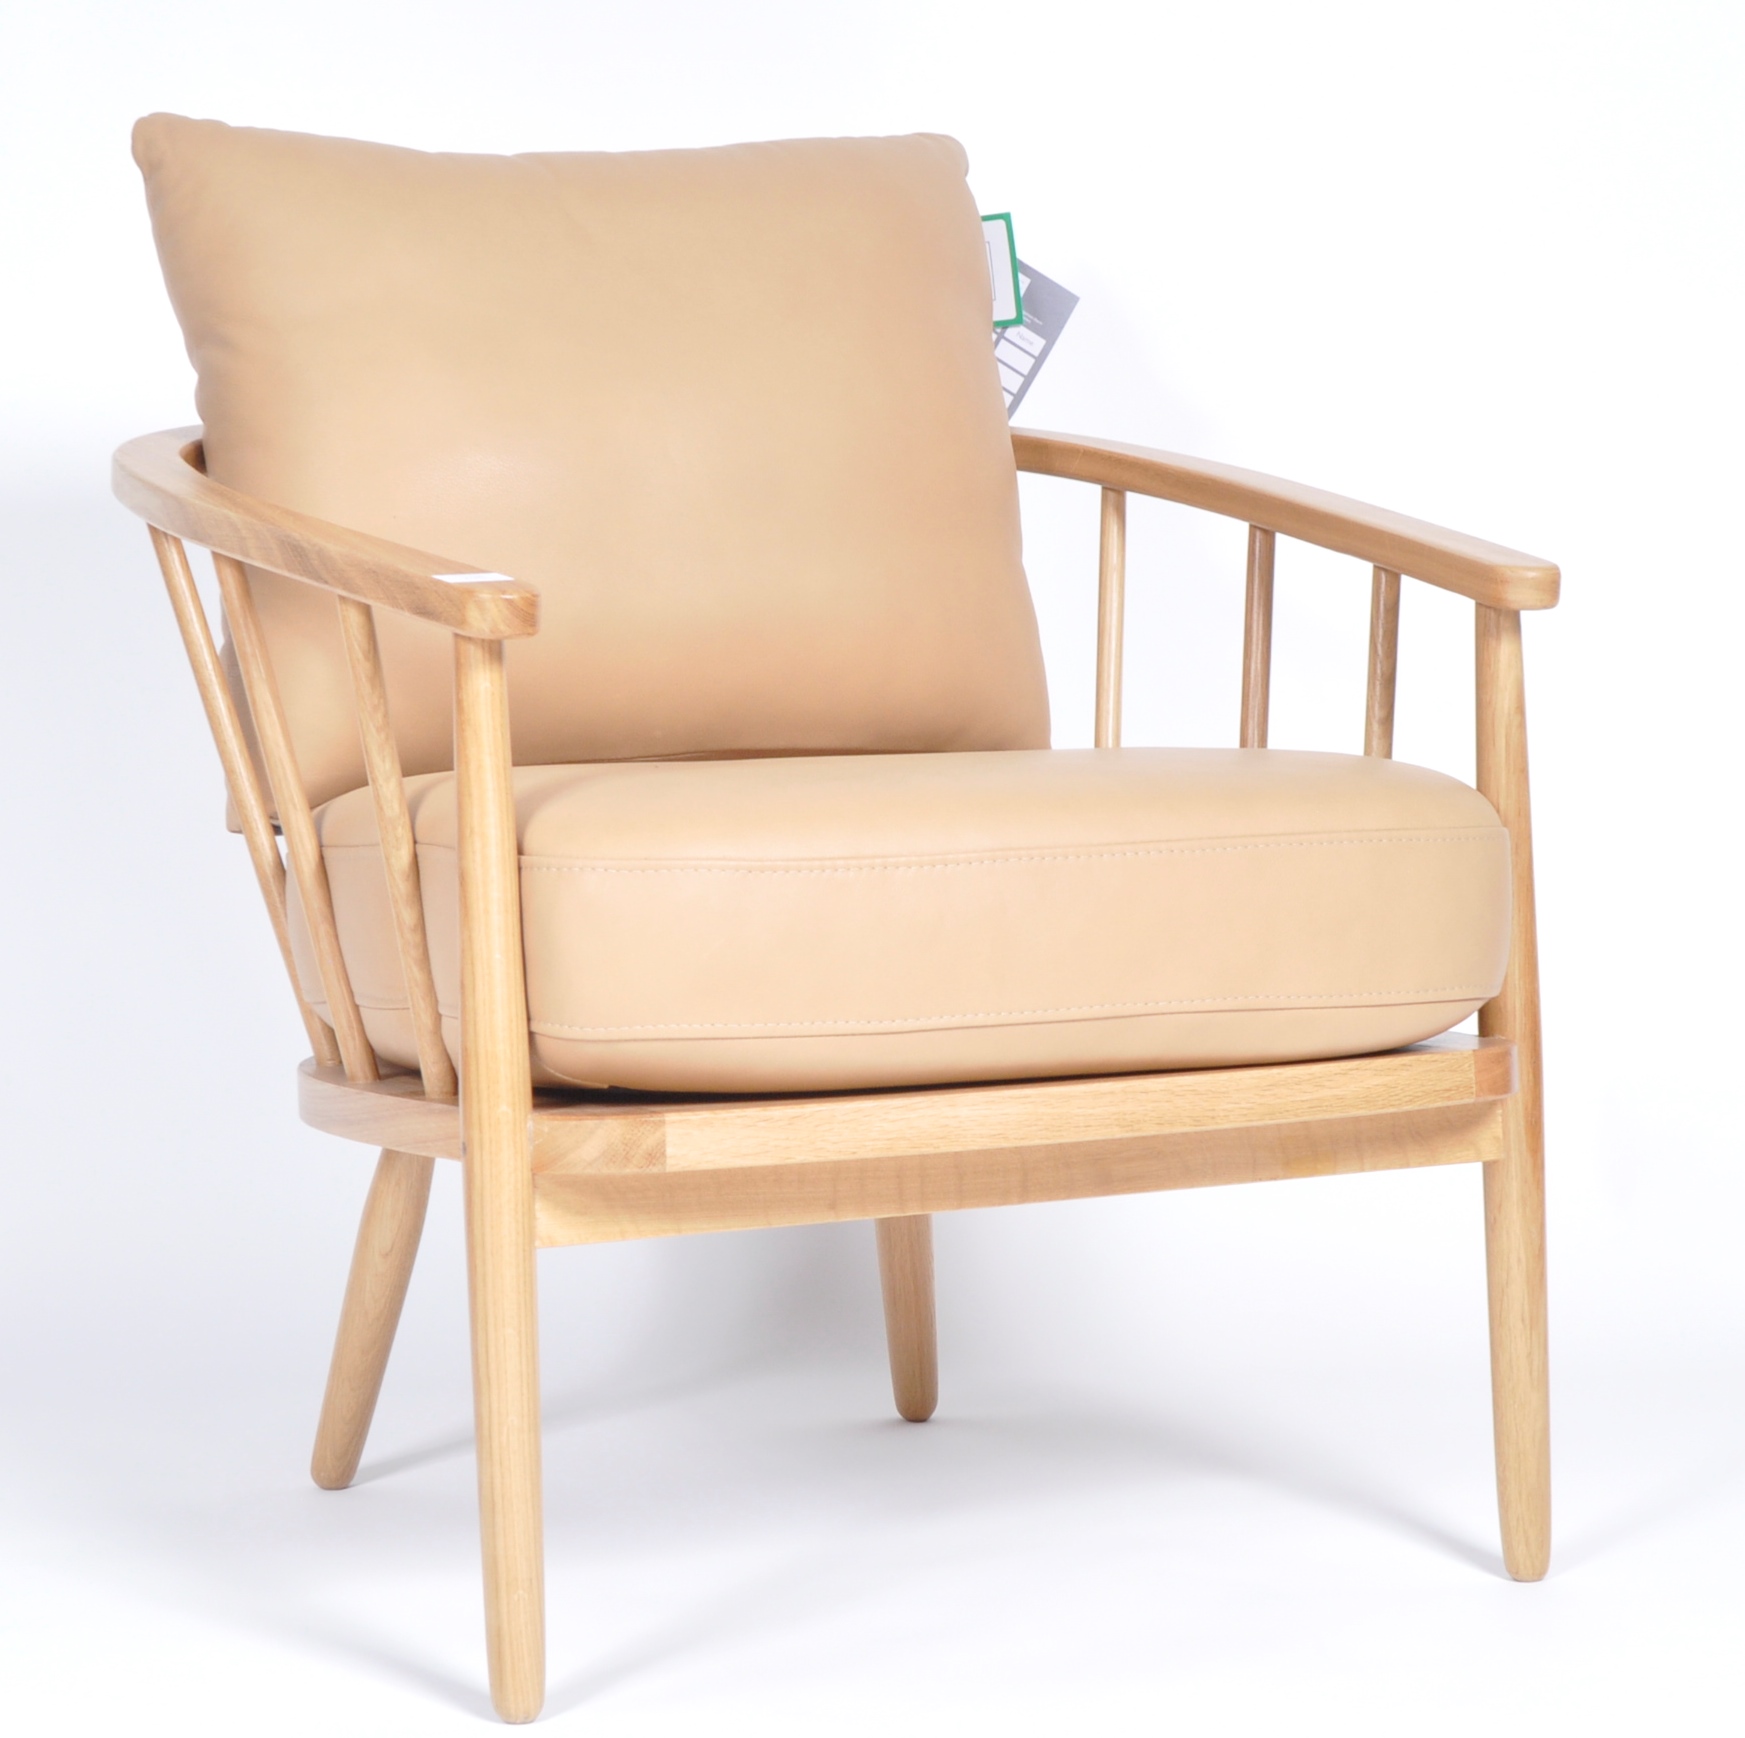 JOHN LEWIS - FROME CHAIR - CONTEMPORARY ARMCHAIR